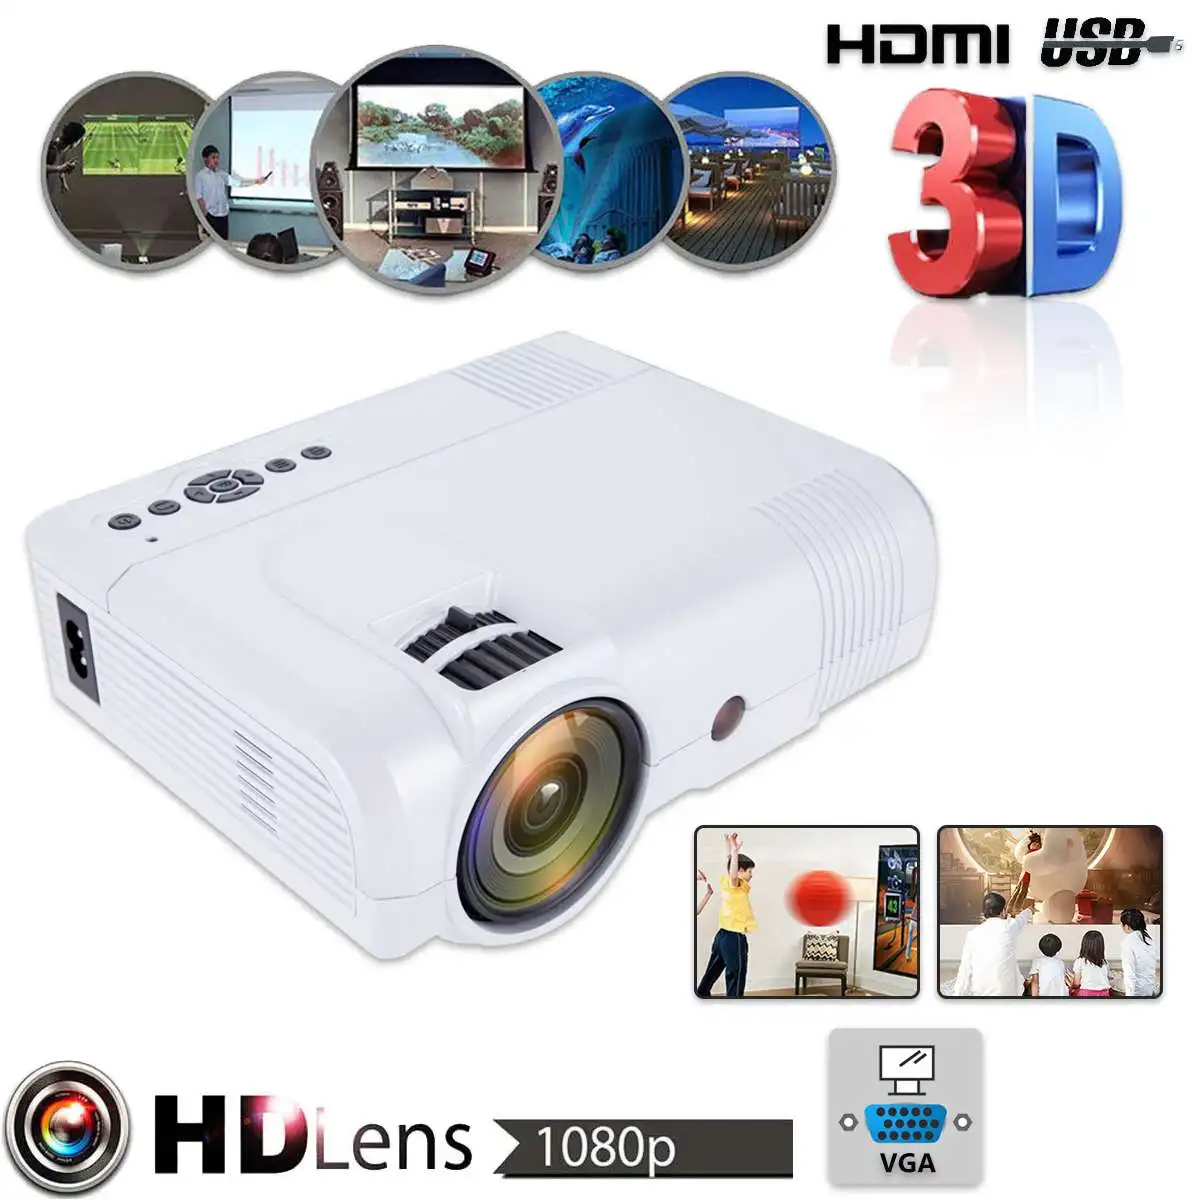 

3D 1080P Mini Projector Full HD L8 3000 lumens LED Cinema Video Digital HD Home Theater Projector with AV Cable Power Cable